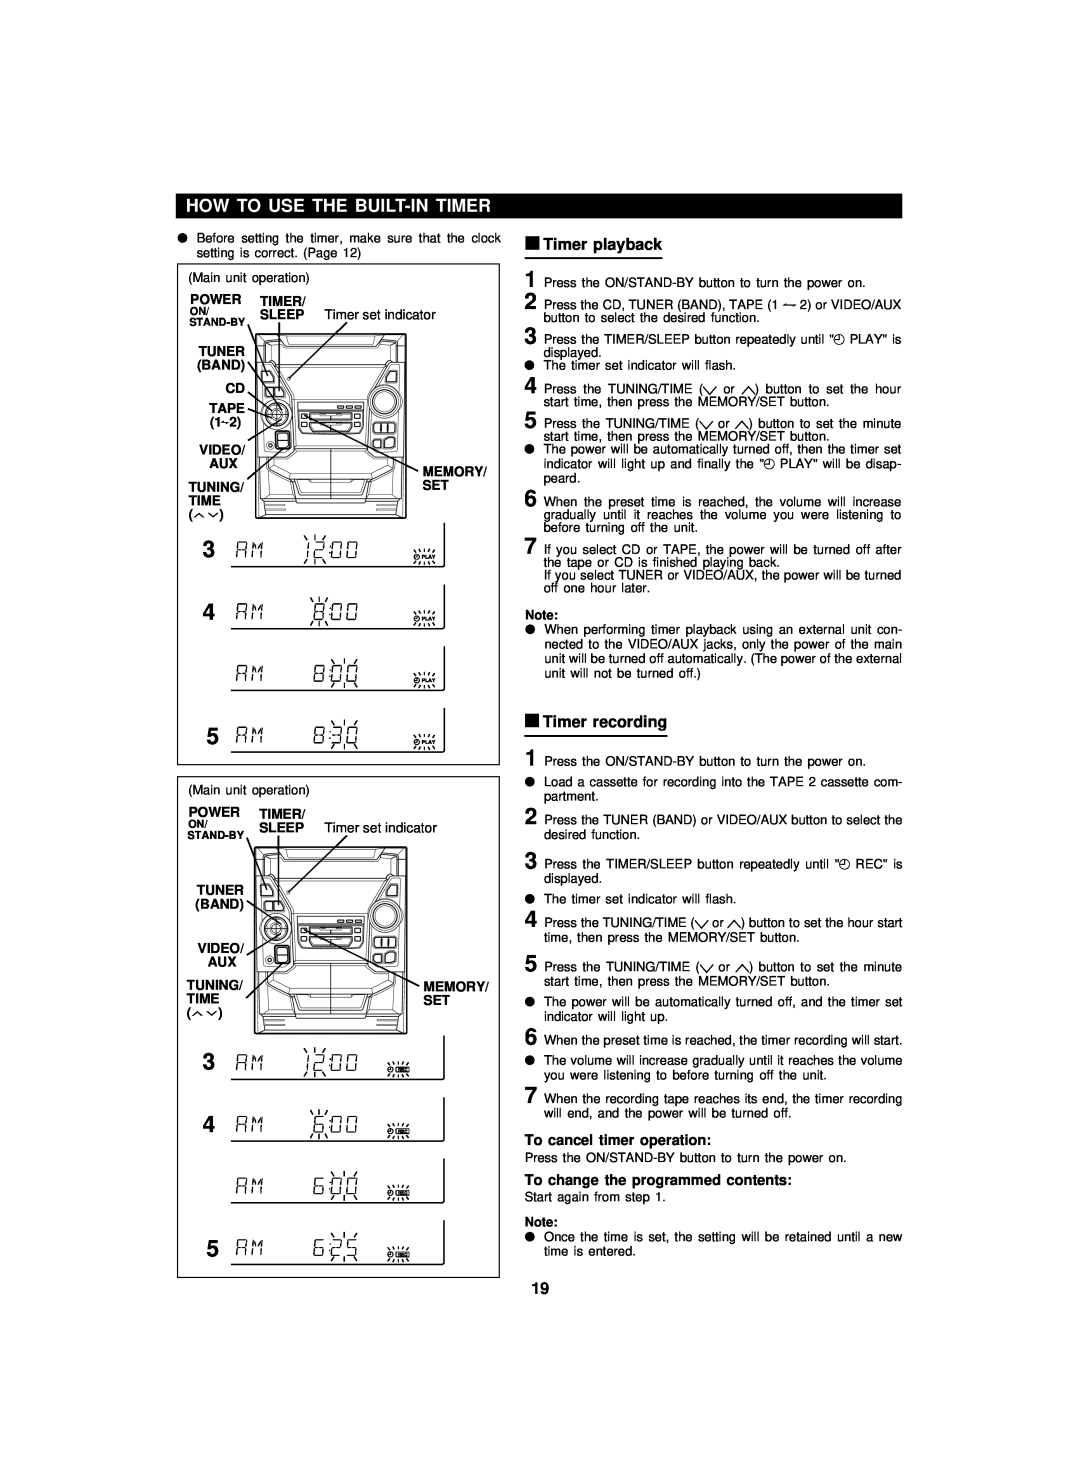 Sharp CD-PC3500 operation manual How To Use The Built-Intimer, To cancel timer operation, To change the programmed contents 